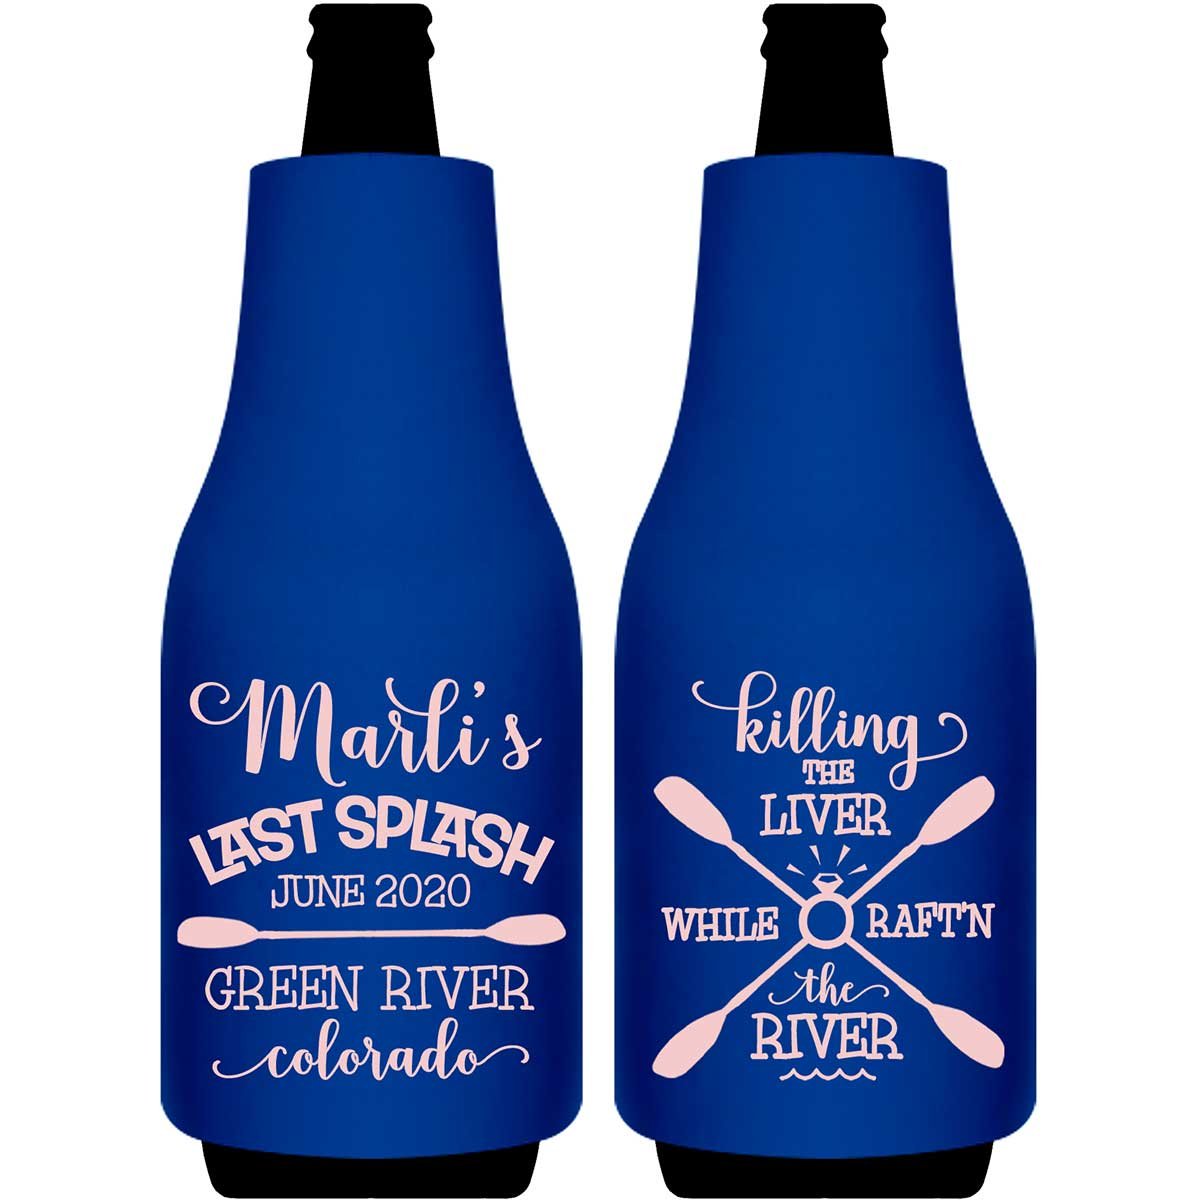 The Last Splash 2A Killing The Liver Foldable Bottle Sleeve Koozies Wedding Gifts for Guests